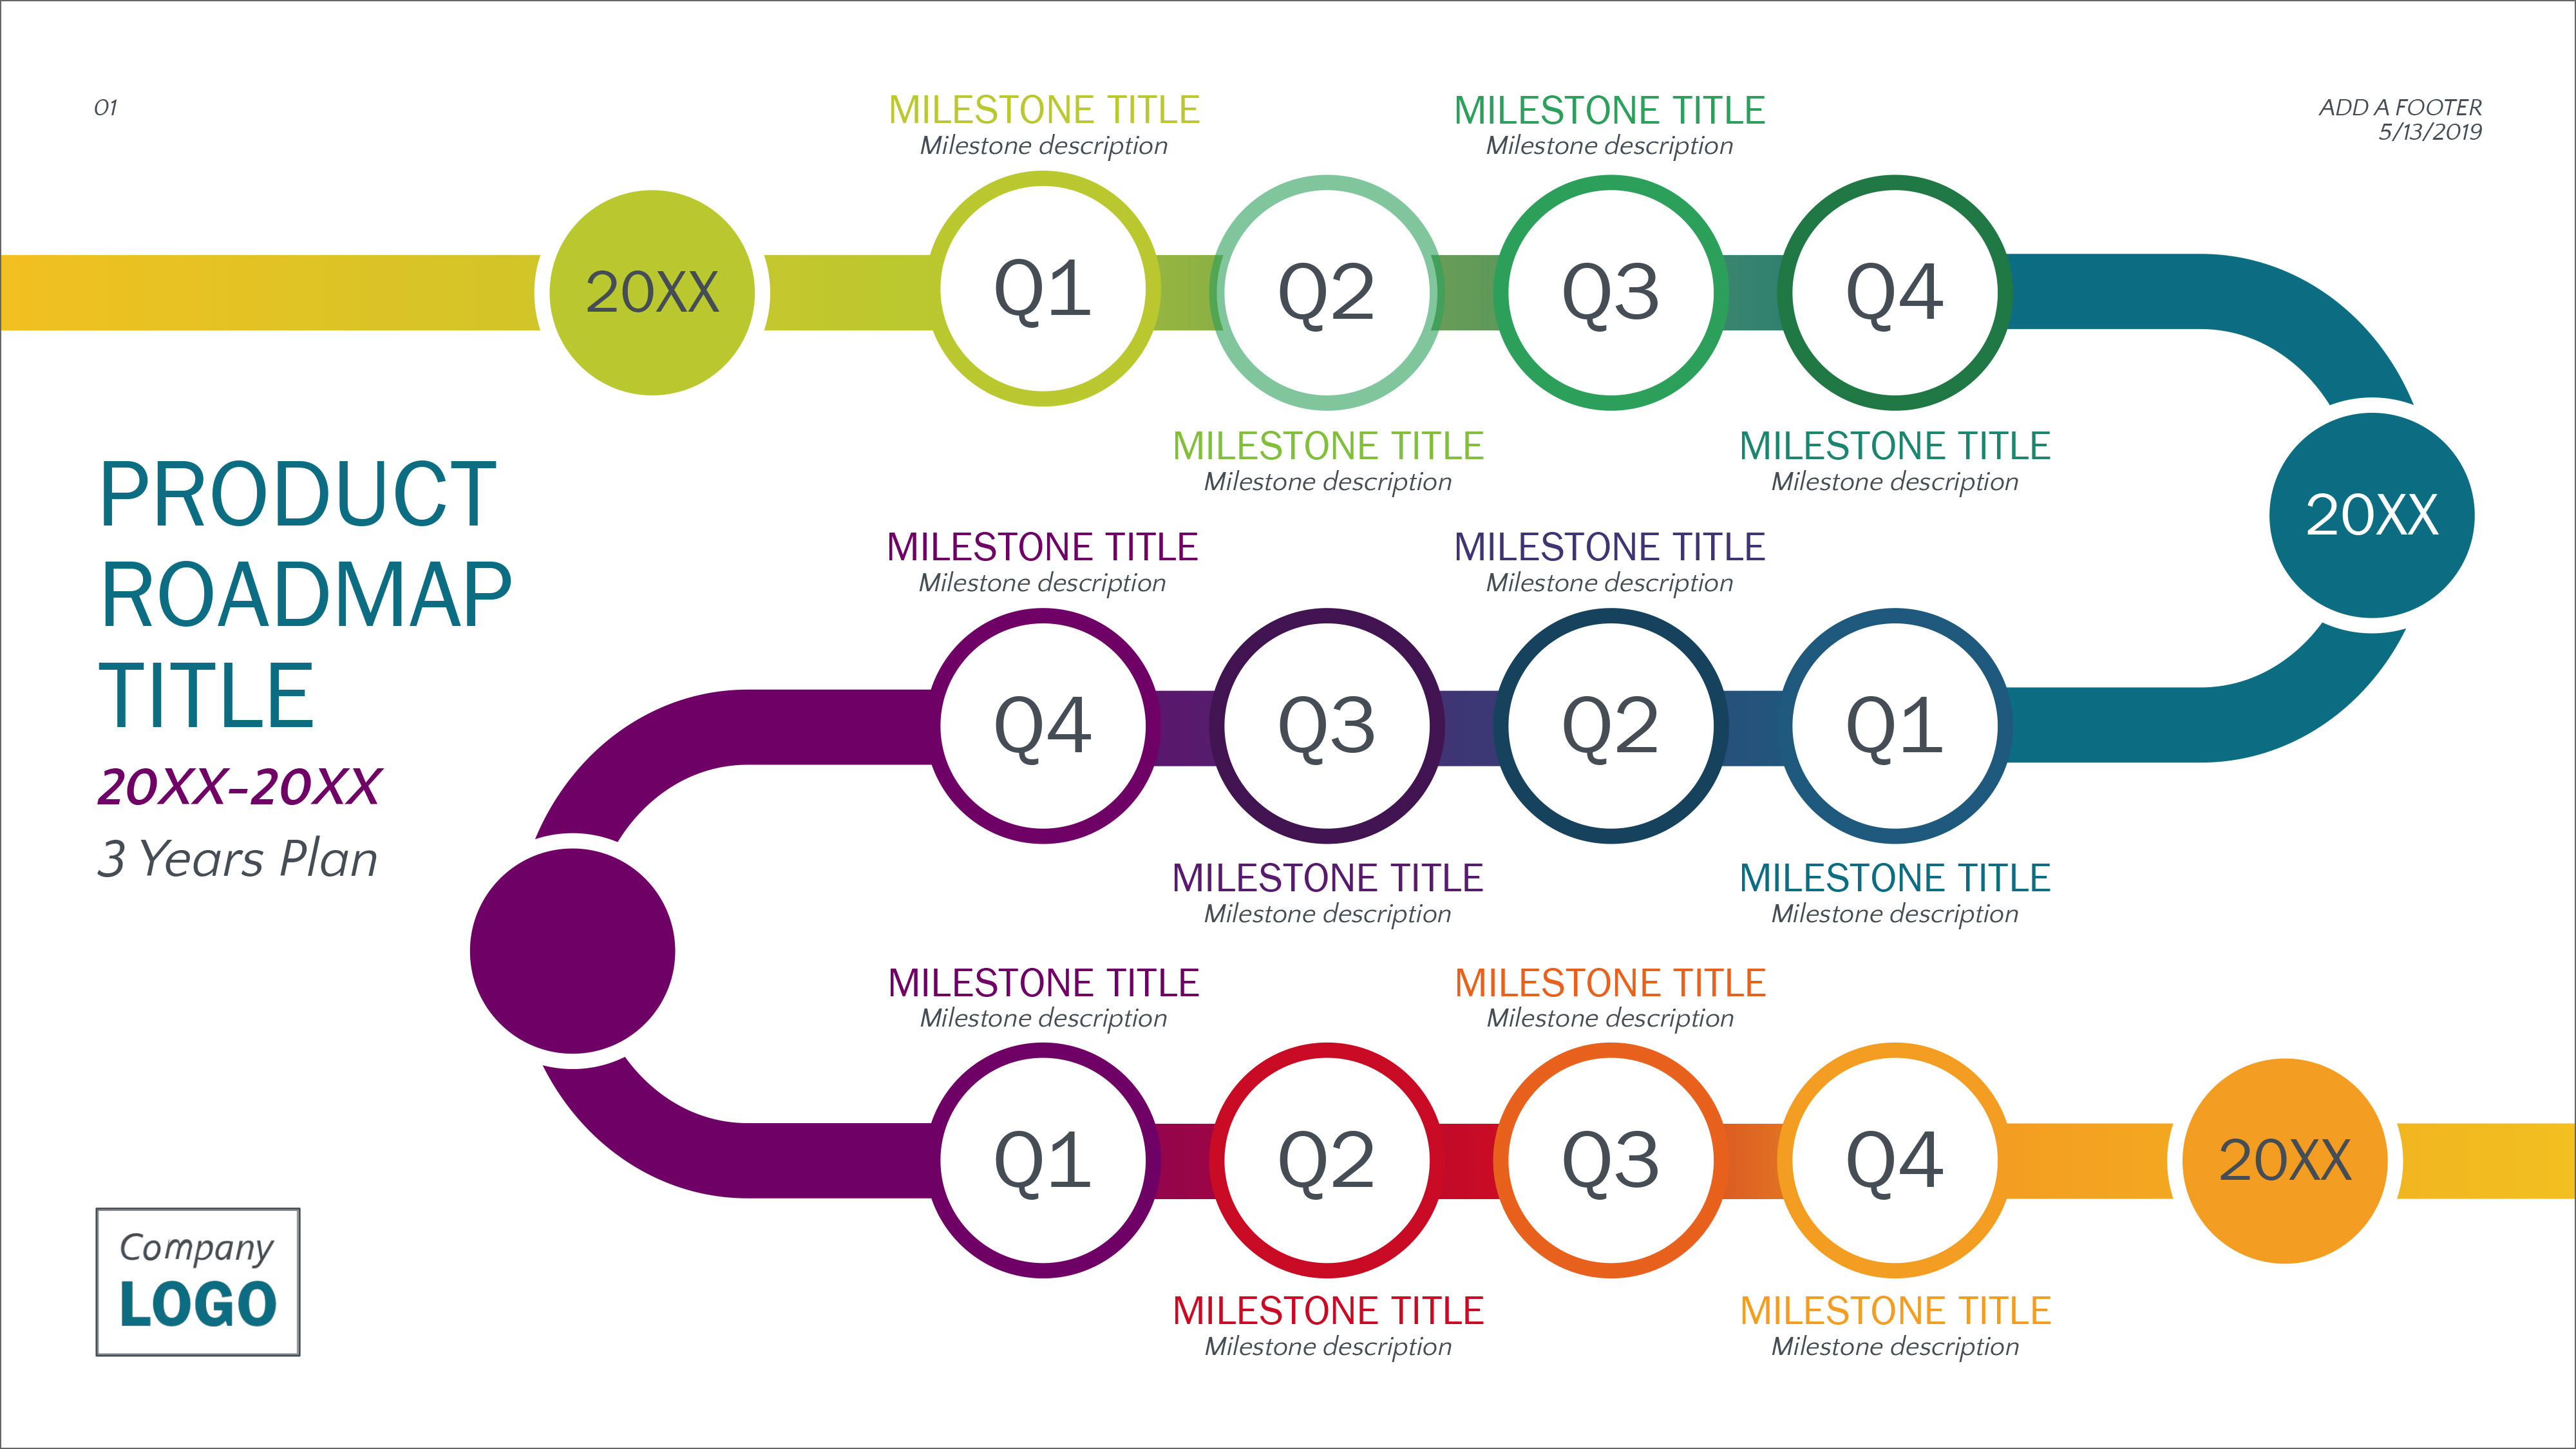 timeline chart powerpoint